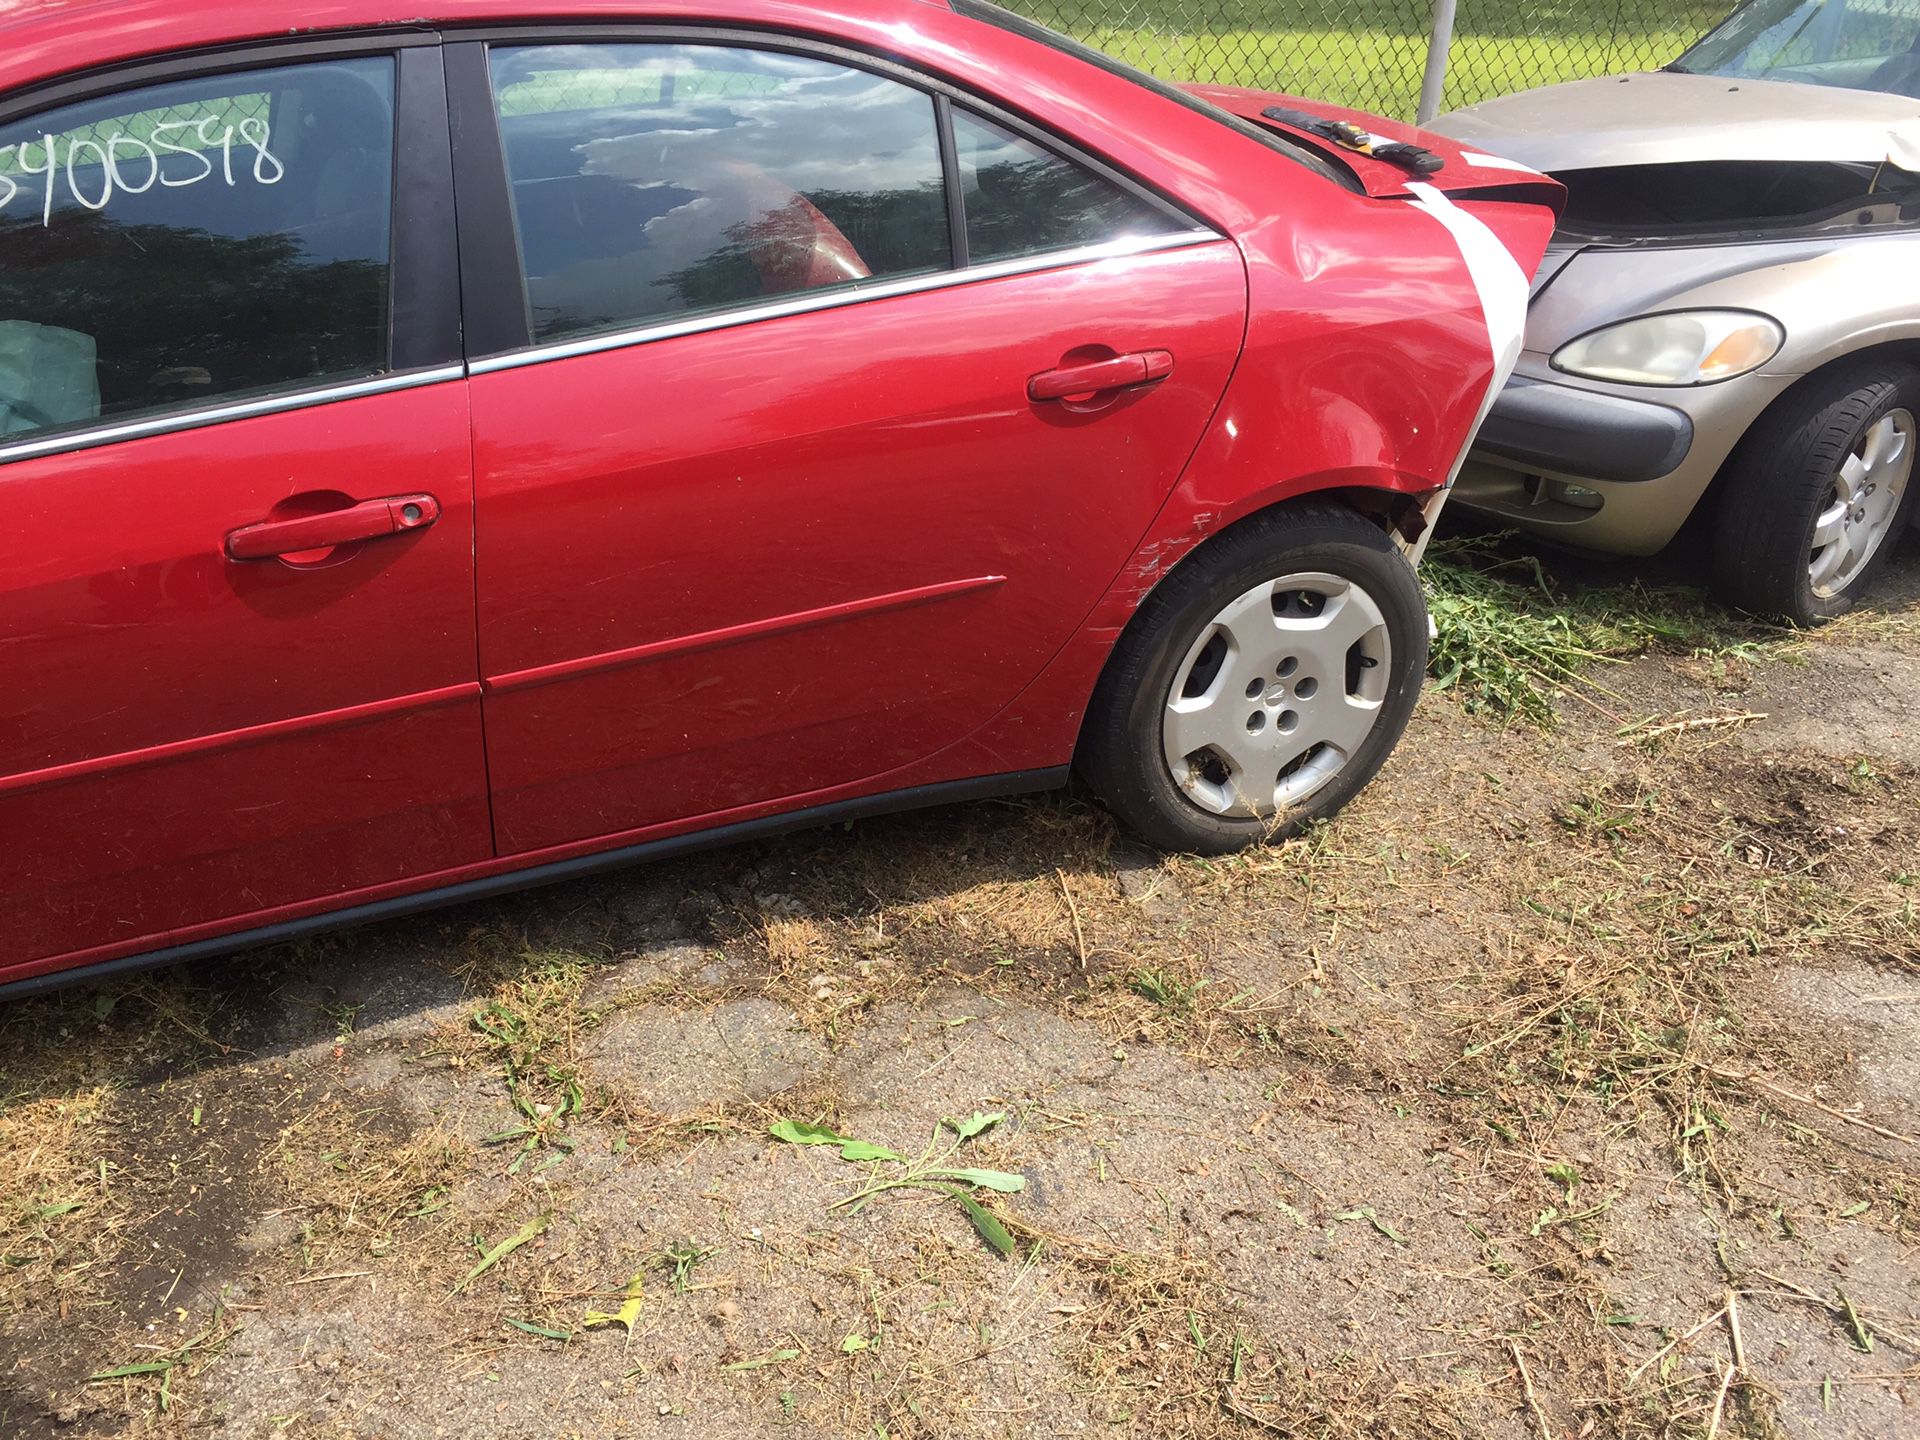 2006 Pontiac G6, for parts- hit in the front and rear